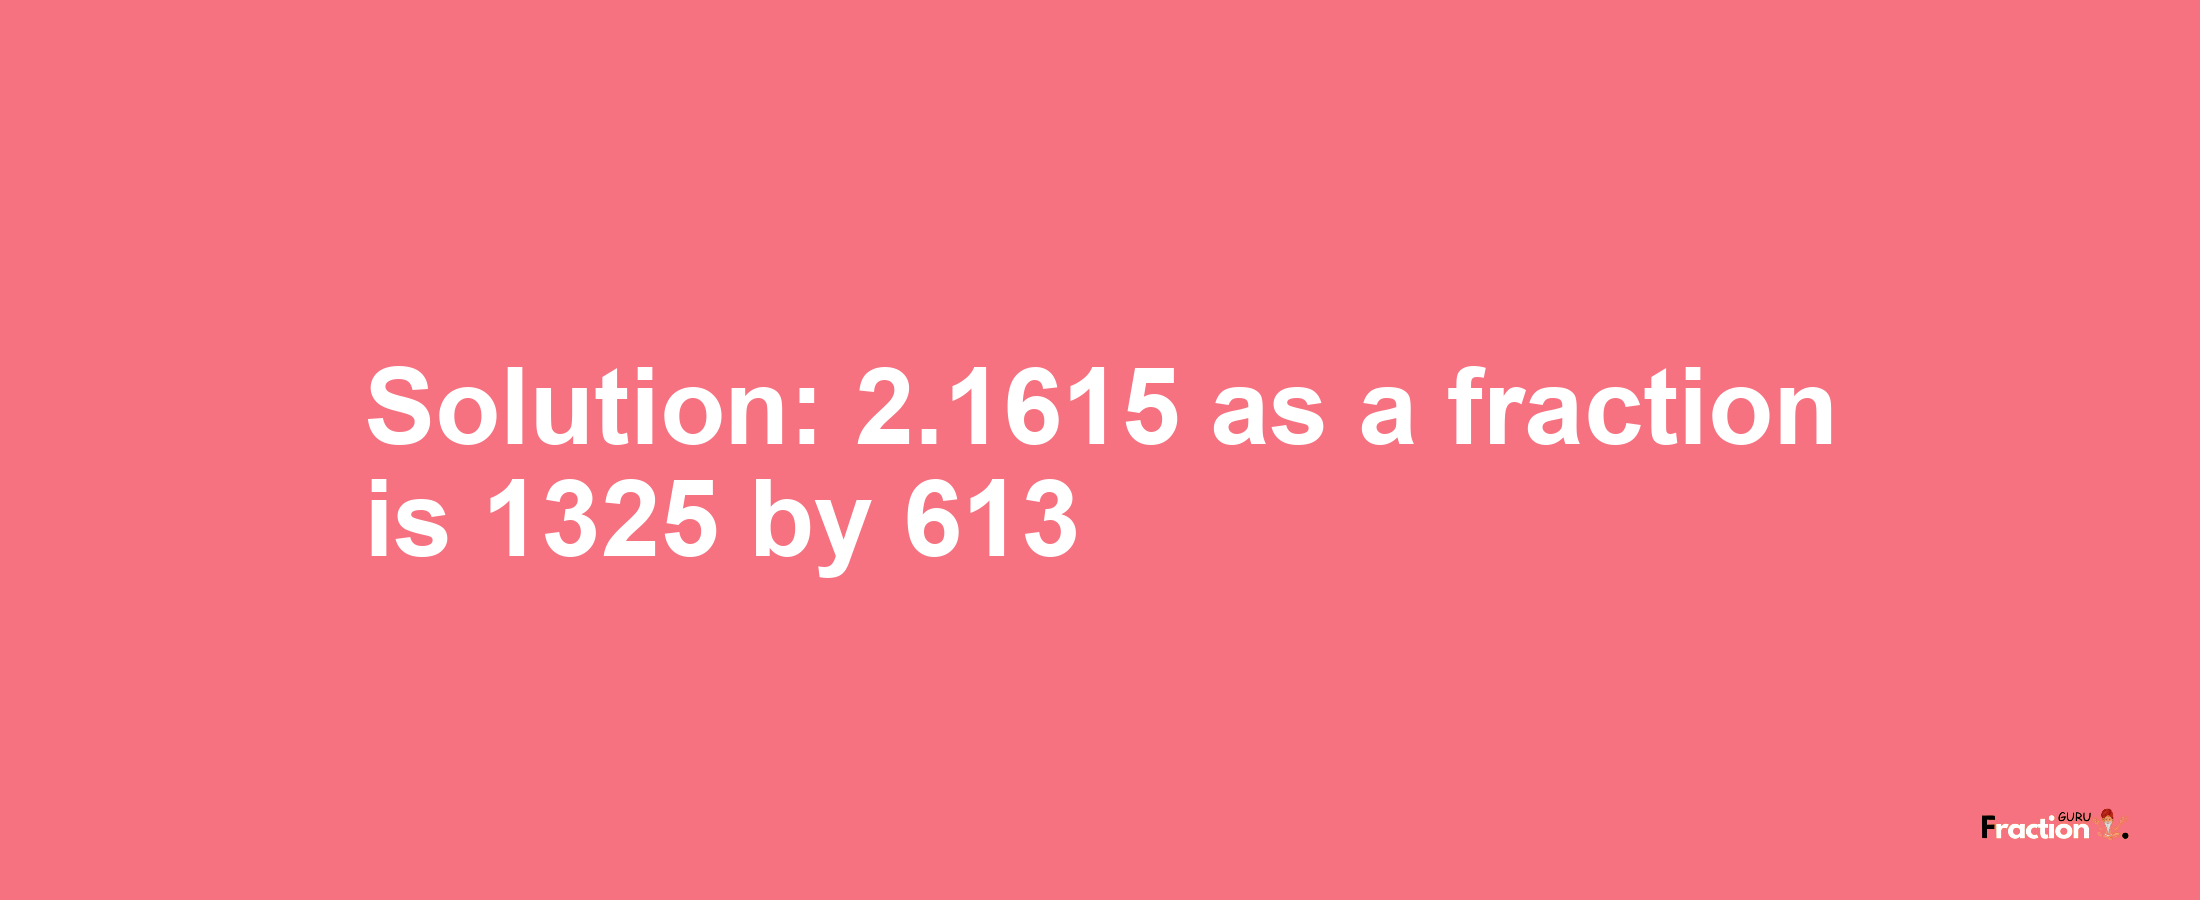 Solution:2.1615 as a fraction is 1325/613